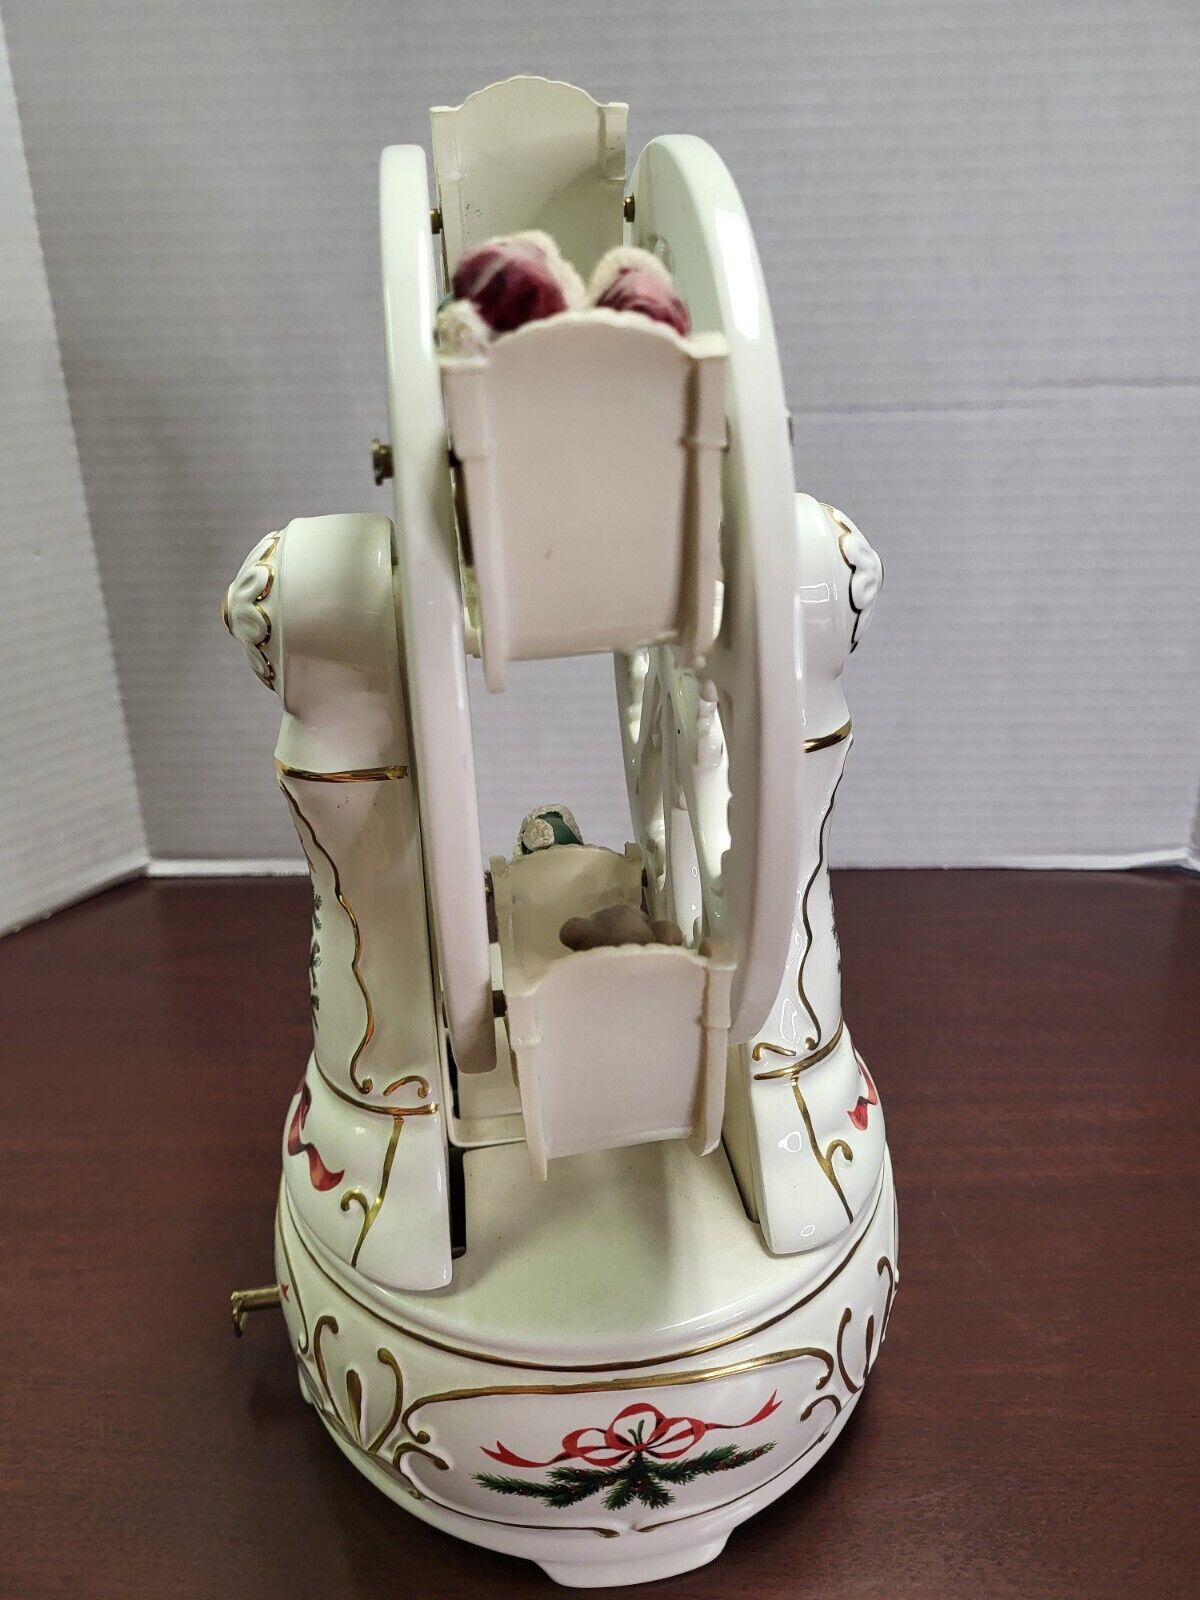 Holiday Classic ferris wheel,Victorian style porcelain, wind up musical